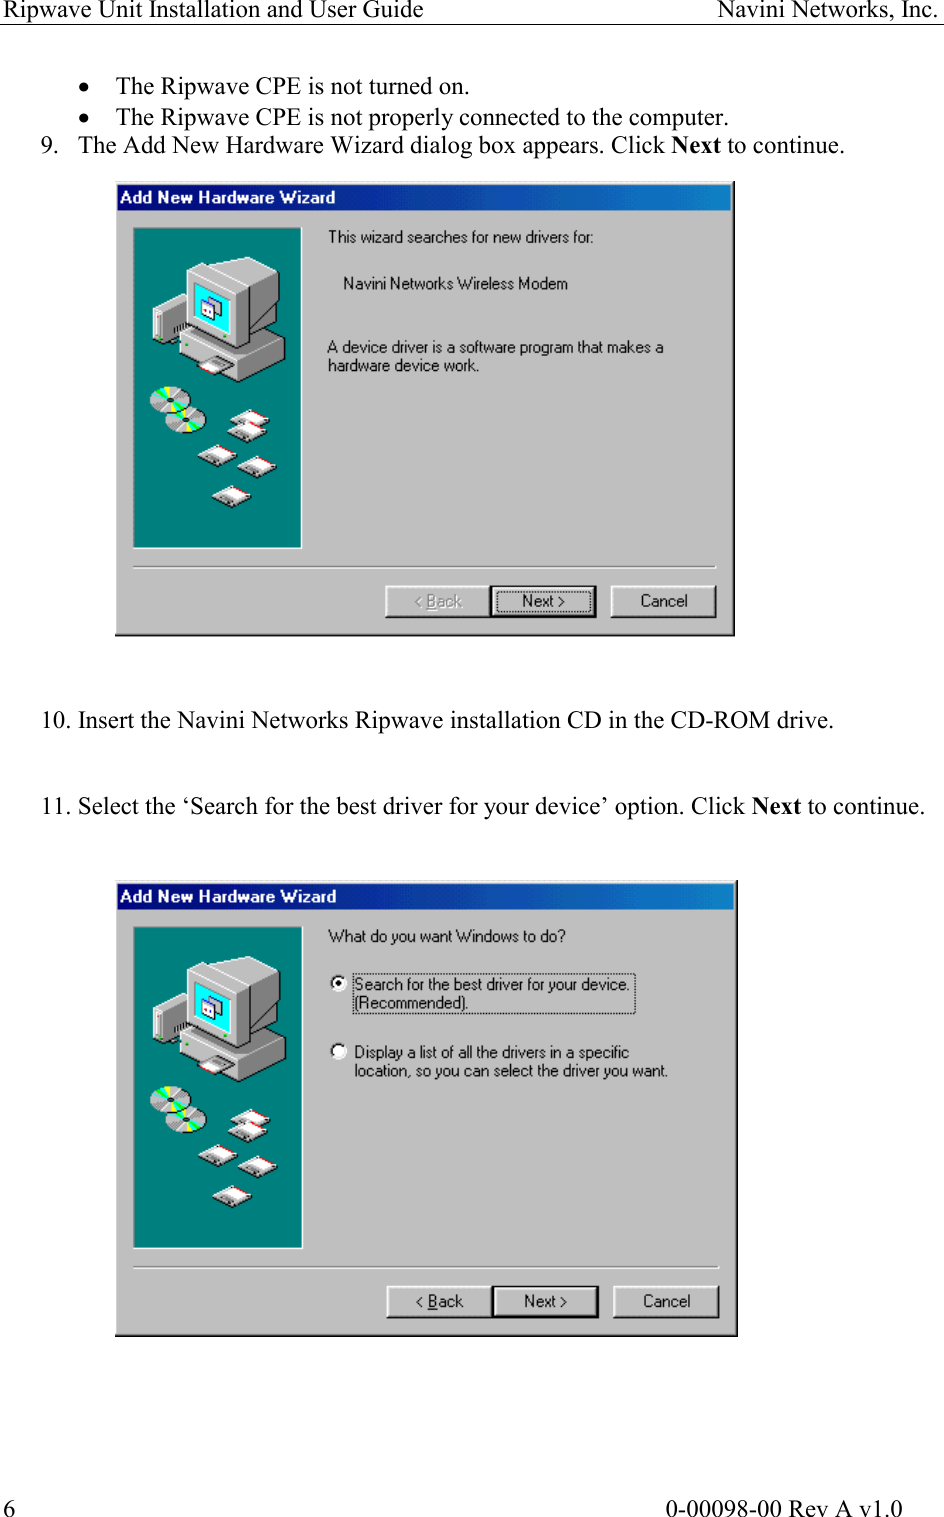 Ripwave Unit Installation and User Guide                                               Navini Networks, Inc.  ·  The Ripwave CPE is not turned on. ·  The Ripwave CPE is not properly connected to the computer. 9.  The Add New Hardware Wizard dialog box appears. Click Next to continue.                    10. Insert the Navini Networks Ripwave installation CD in the CD-ROM drive.    11. Select the ‘Search for the best driver for your device’ option. Click Next to continue.                                                                                                                           0-00098-00 Rev A v1.0 6